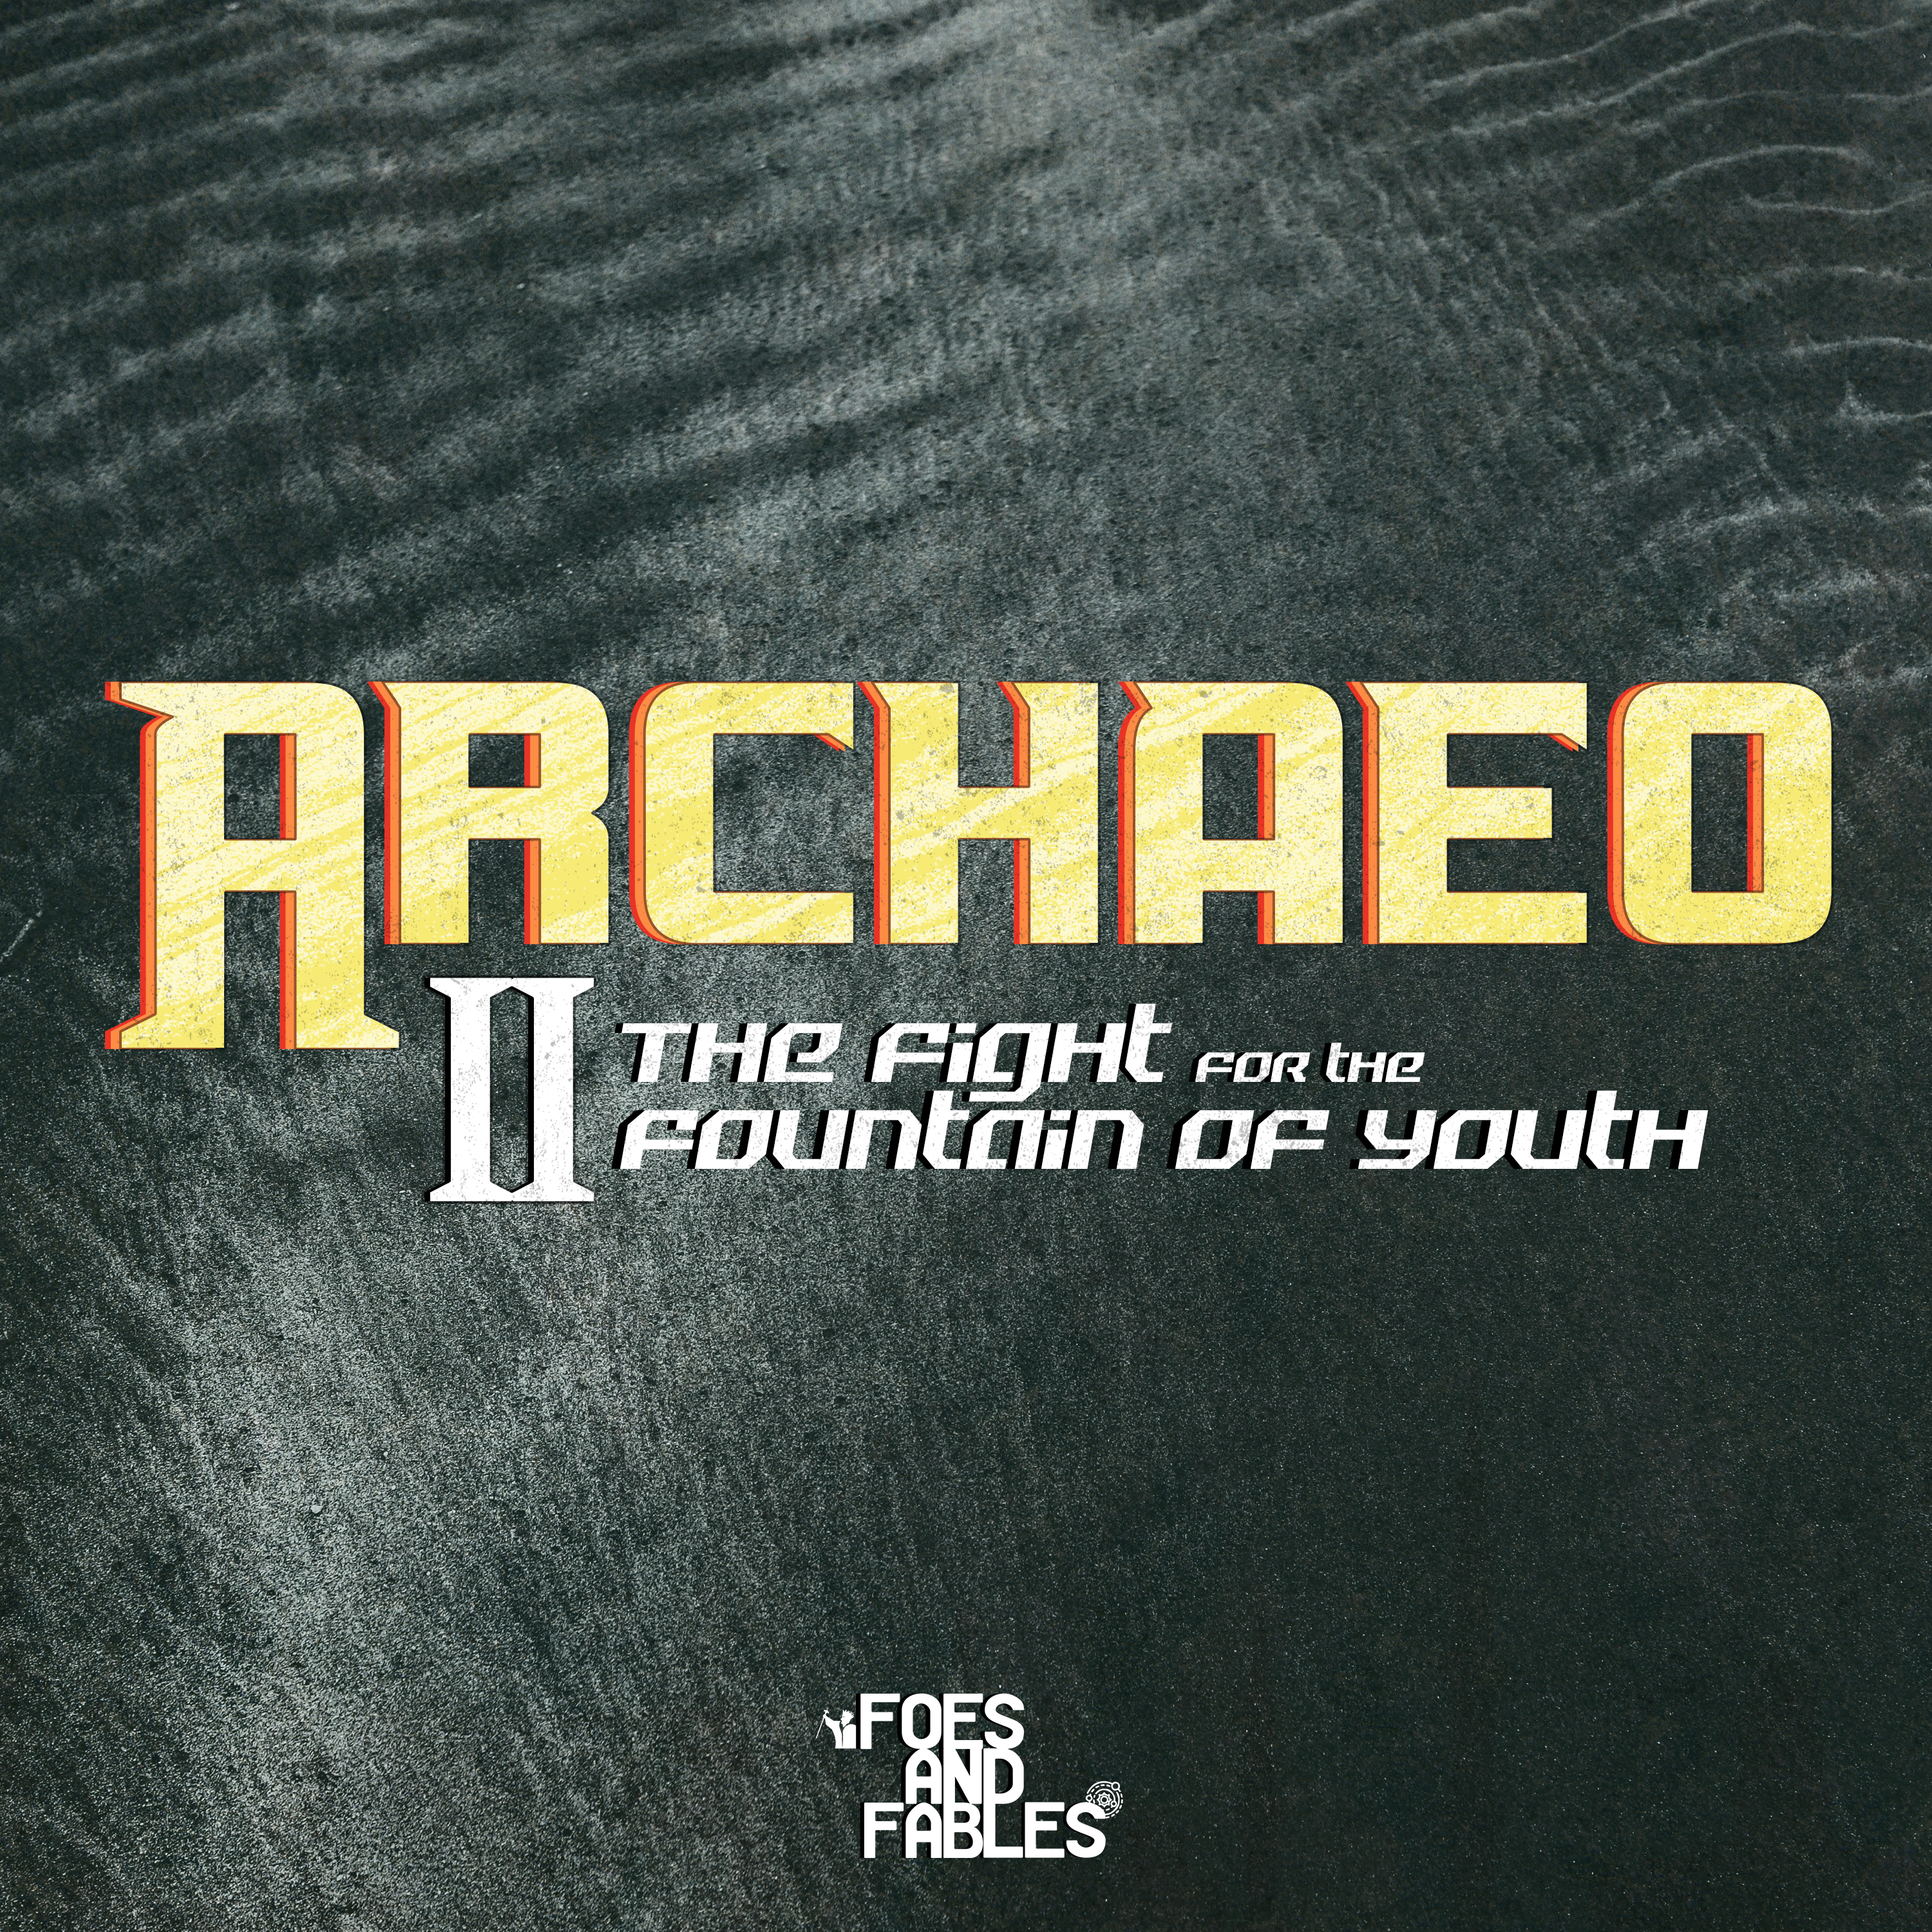 4. The Adventure Ends | ARCHAEO II: The Fight for the Fountain of Youth